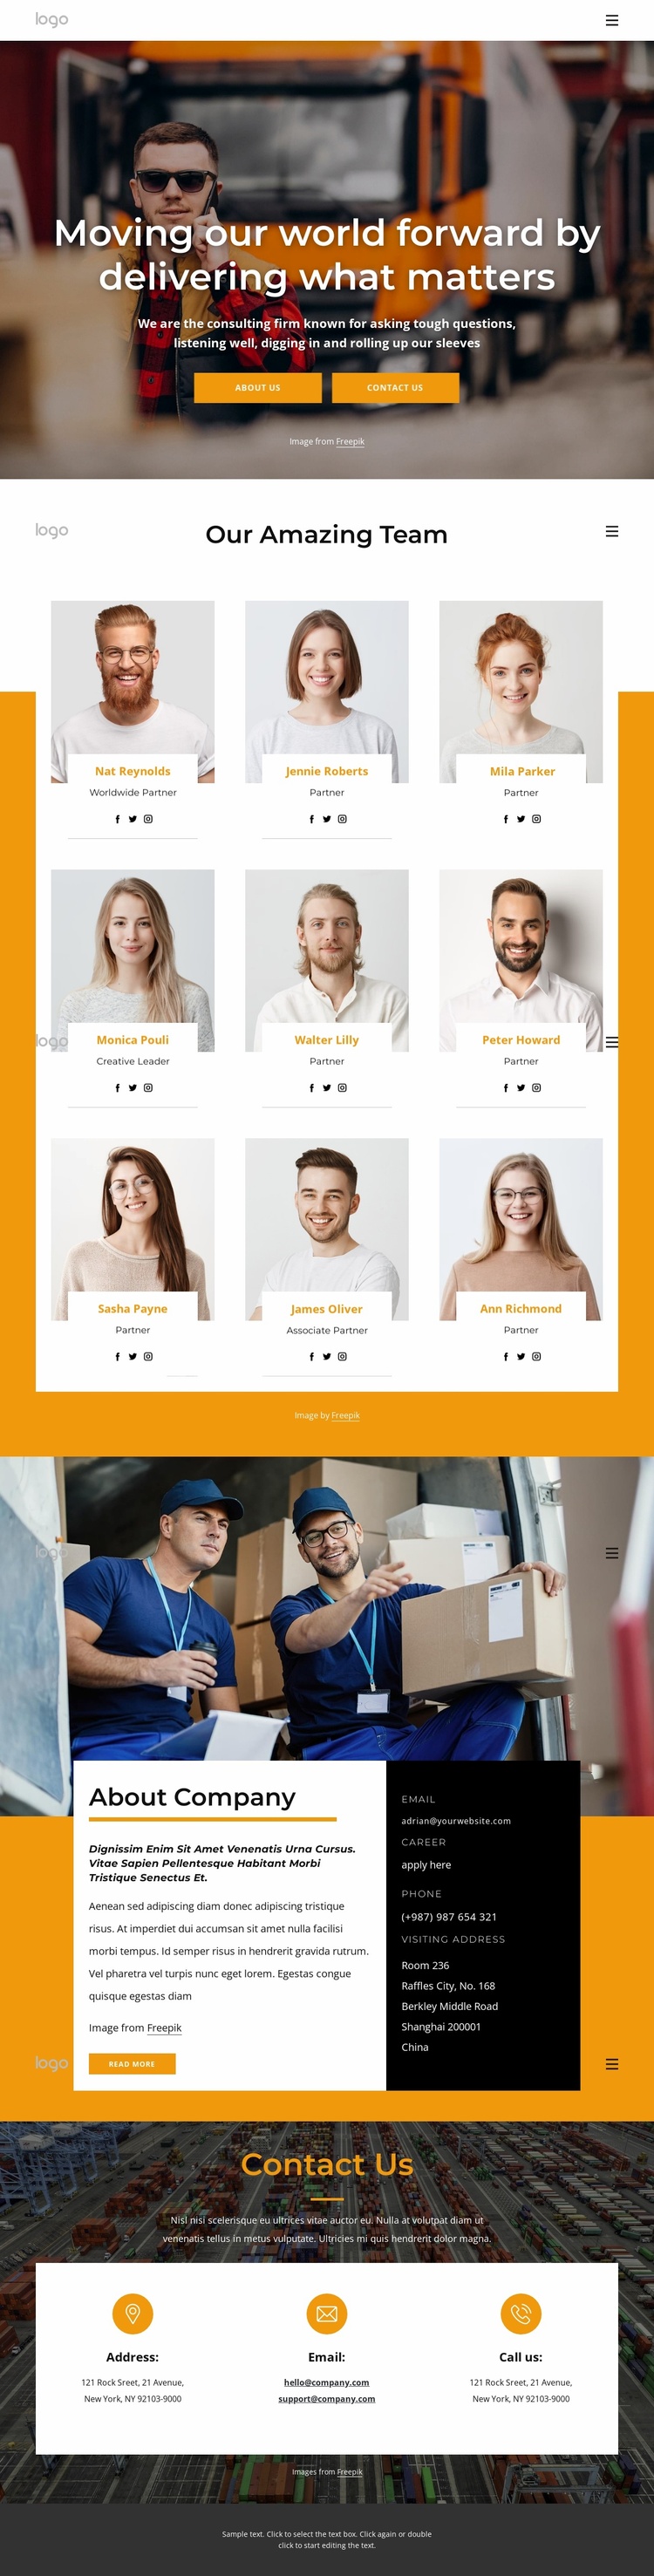 International parcel delivery company Website Template